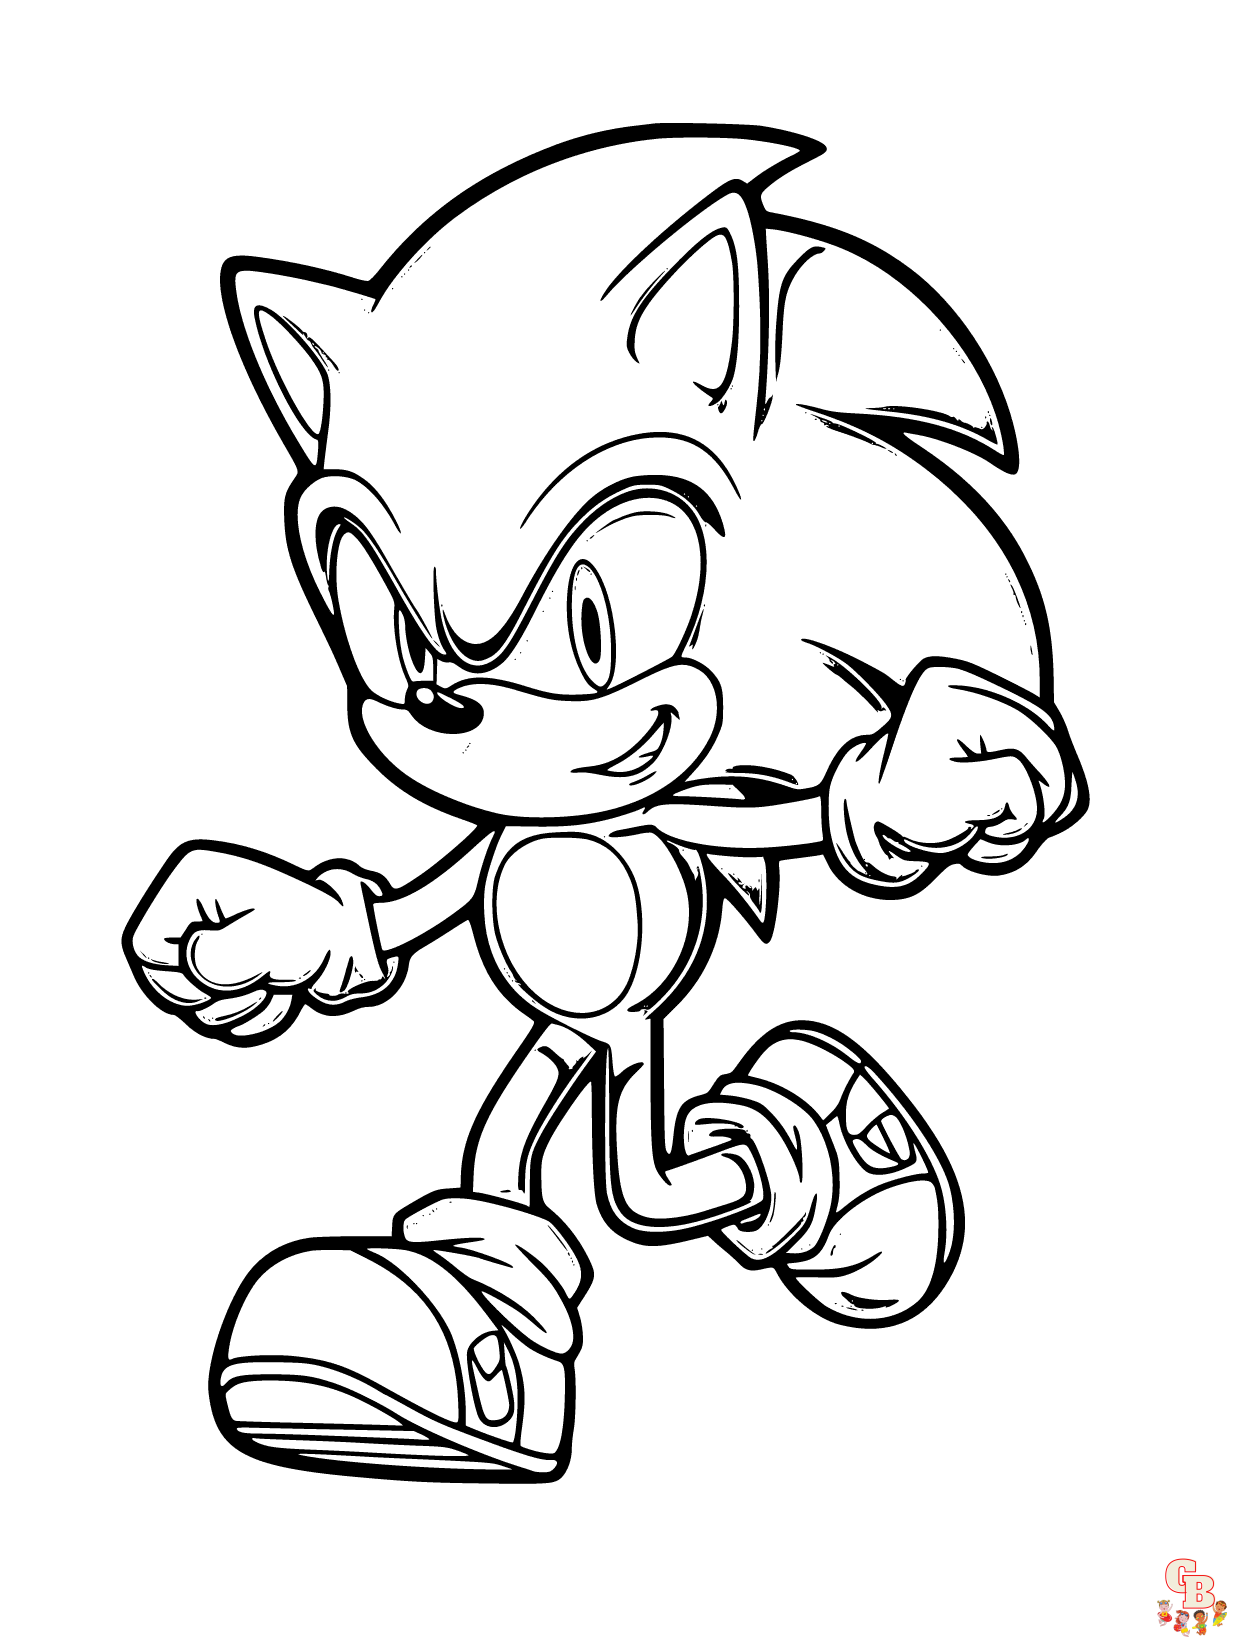 Free Printable Sonic The Hedgehog Coloring Pages For Kids  Hedgehog  colors, Cartoon coloring pages, Super coloring pages